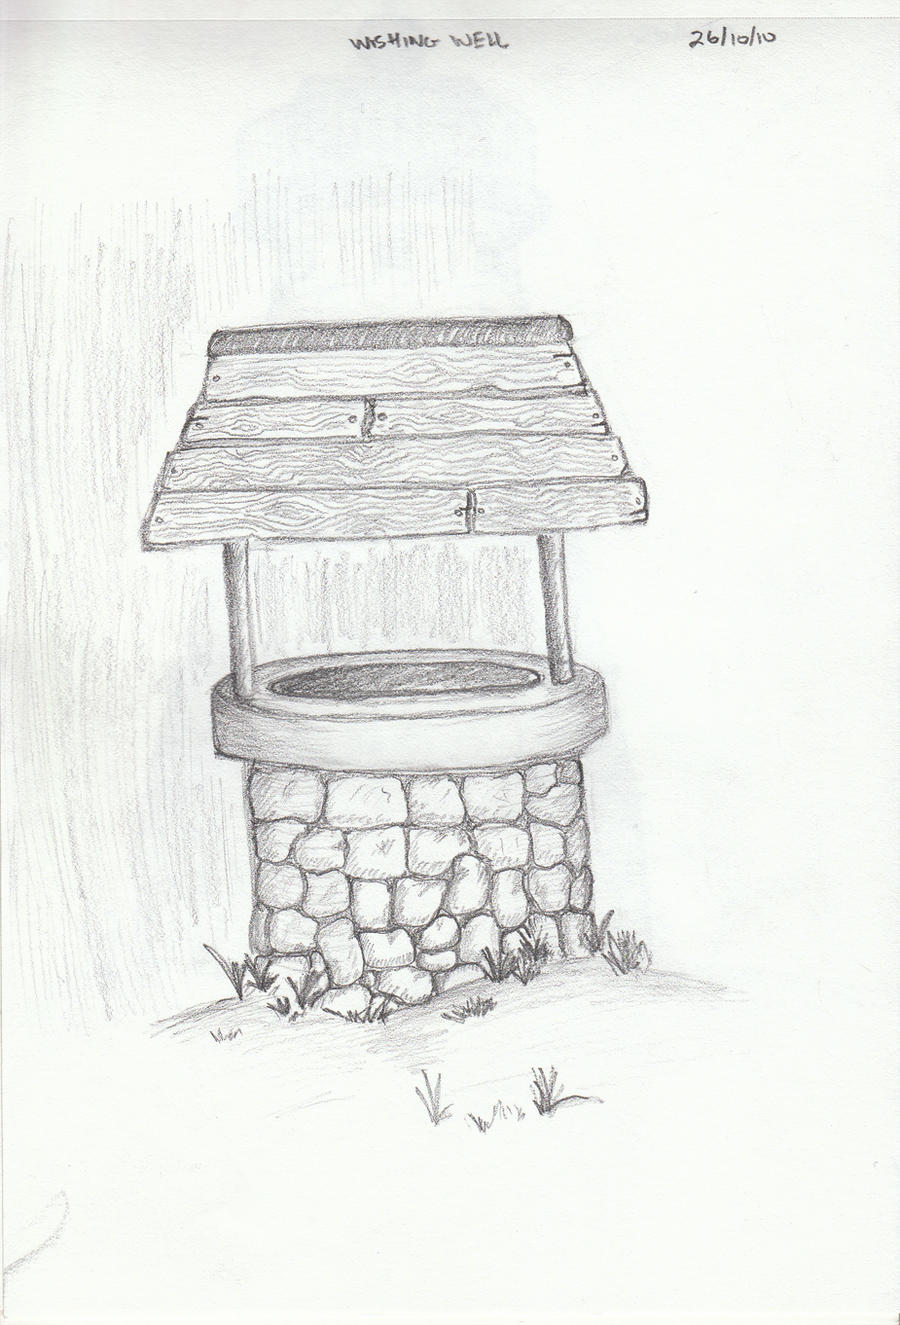 daily_sketch__wishing_well_by_amychr-d33